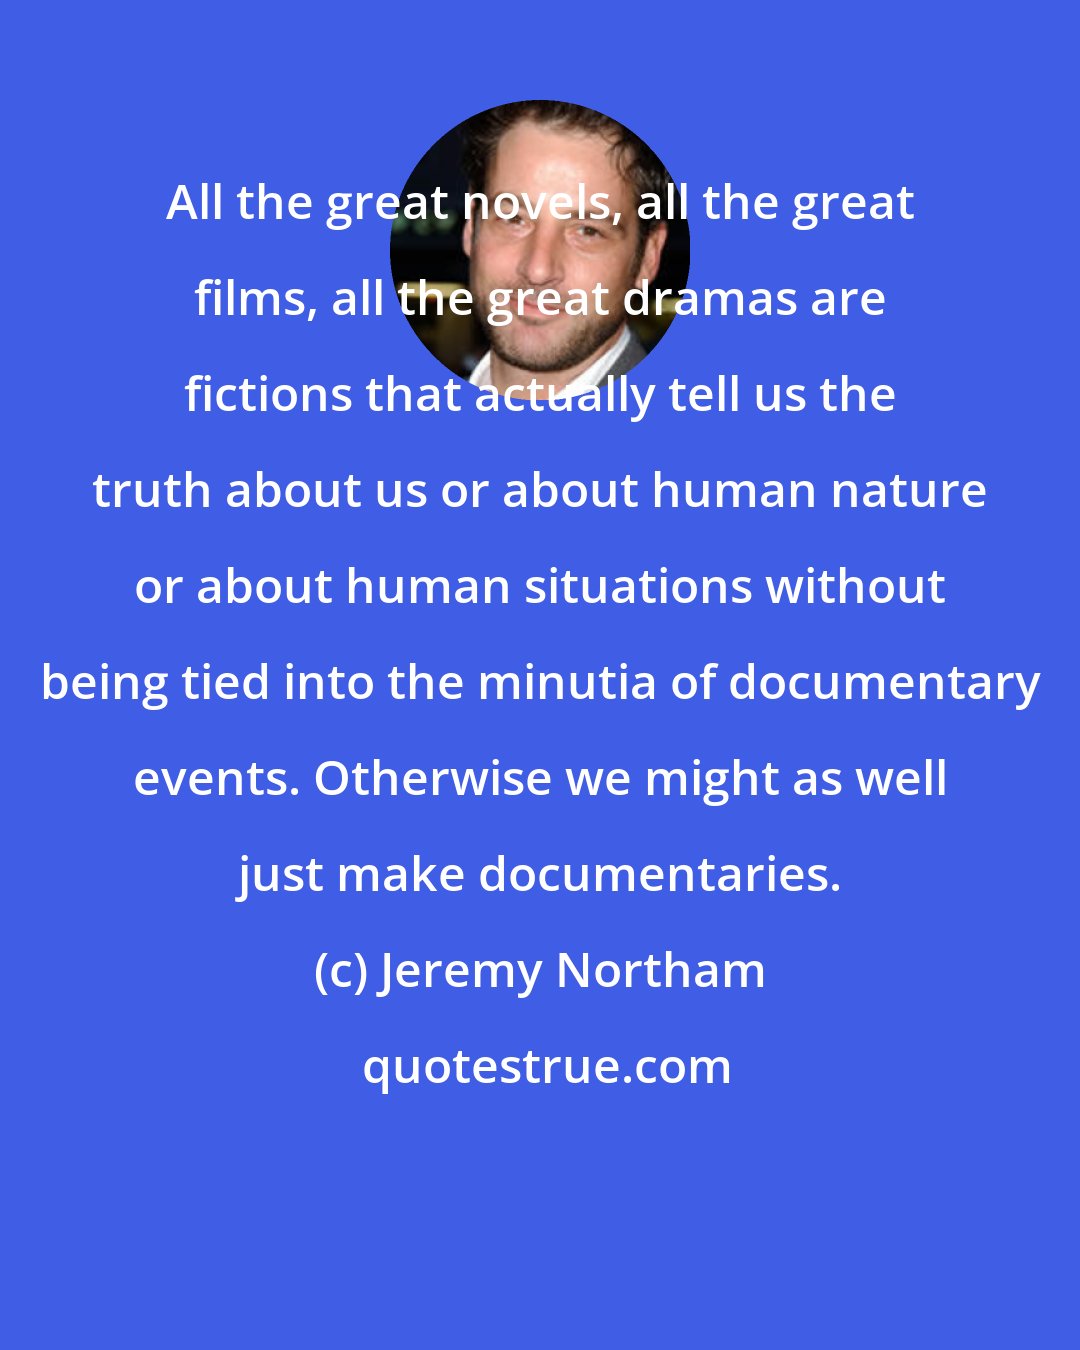 Jeremy Northam: All the great novels, all the great films, all the great dramas are fictions that actually tell us the truth about us or about human nature or about human situations without being tied into the minutia of documentary events. Otherwise we might as well just make documentaries.